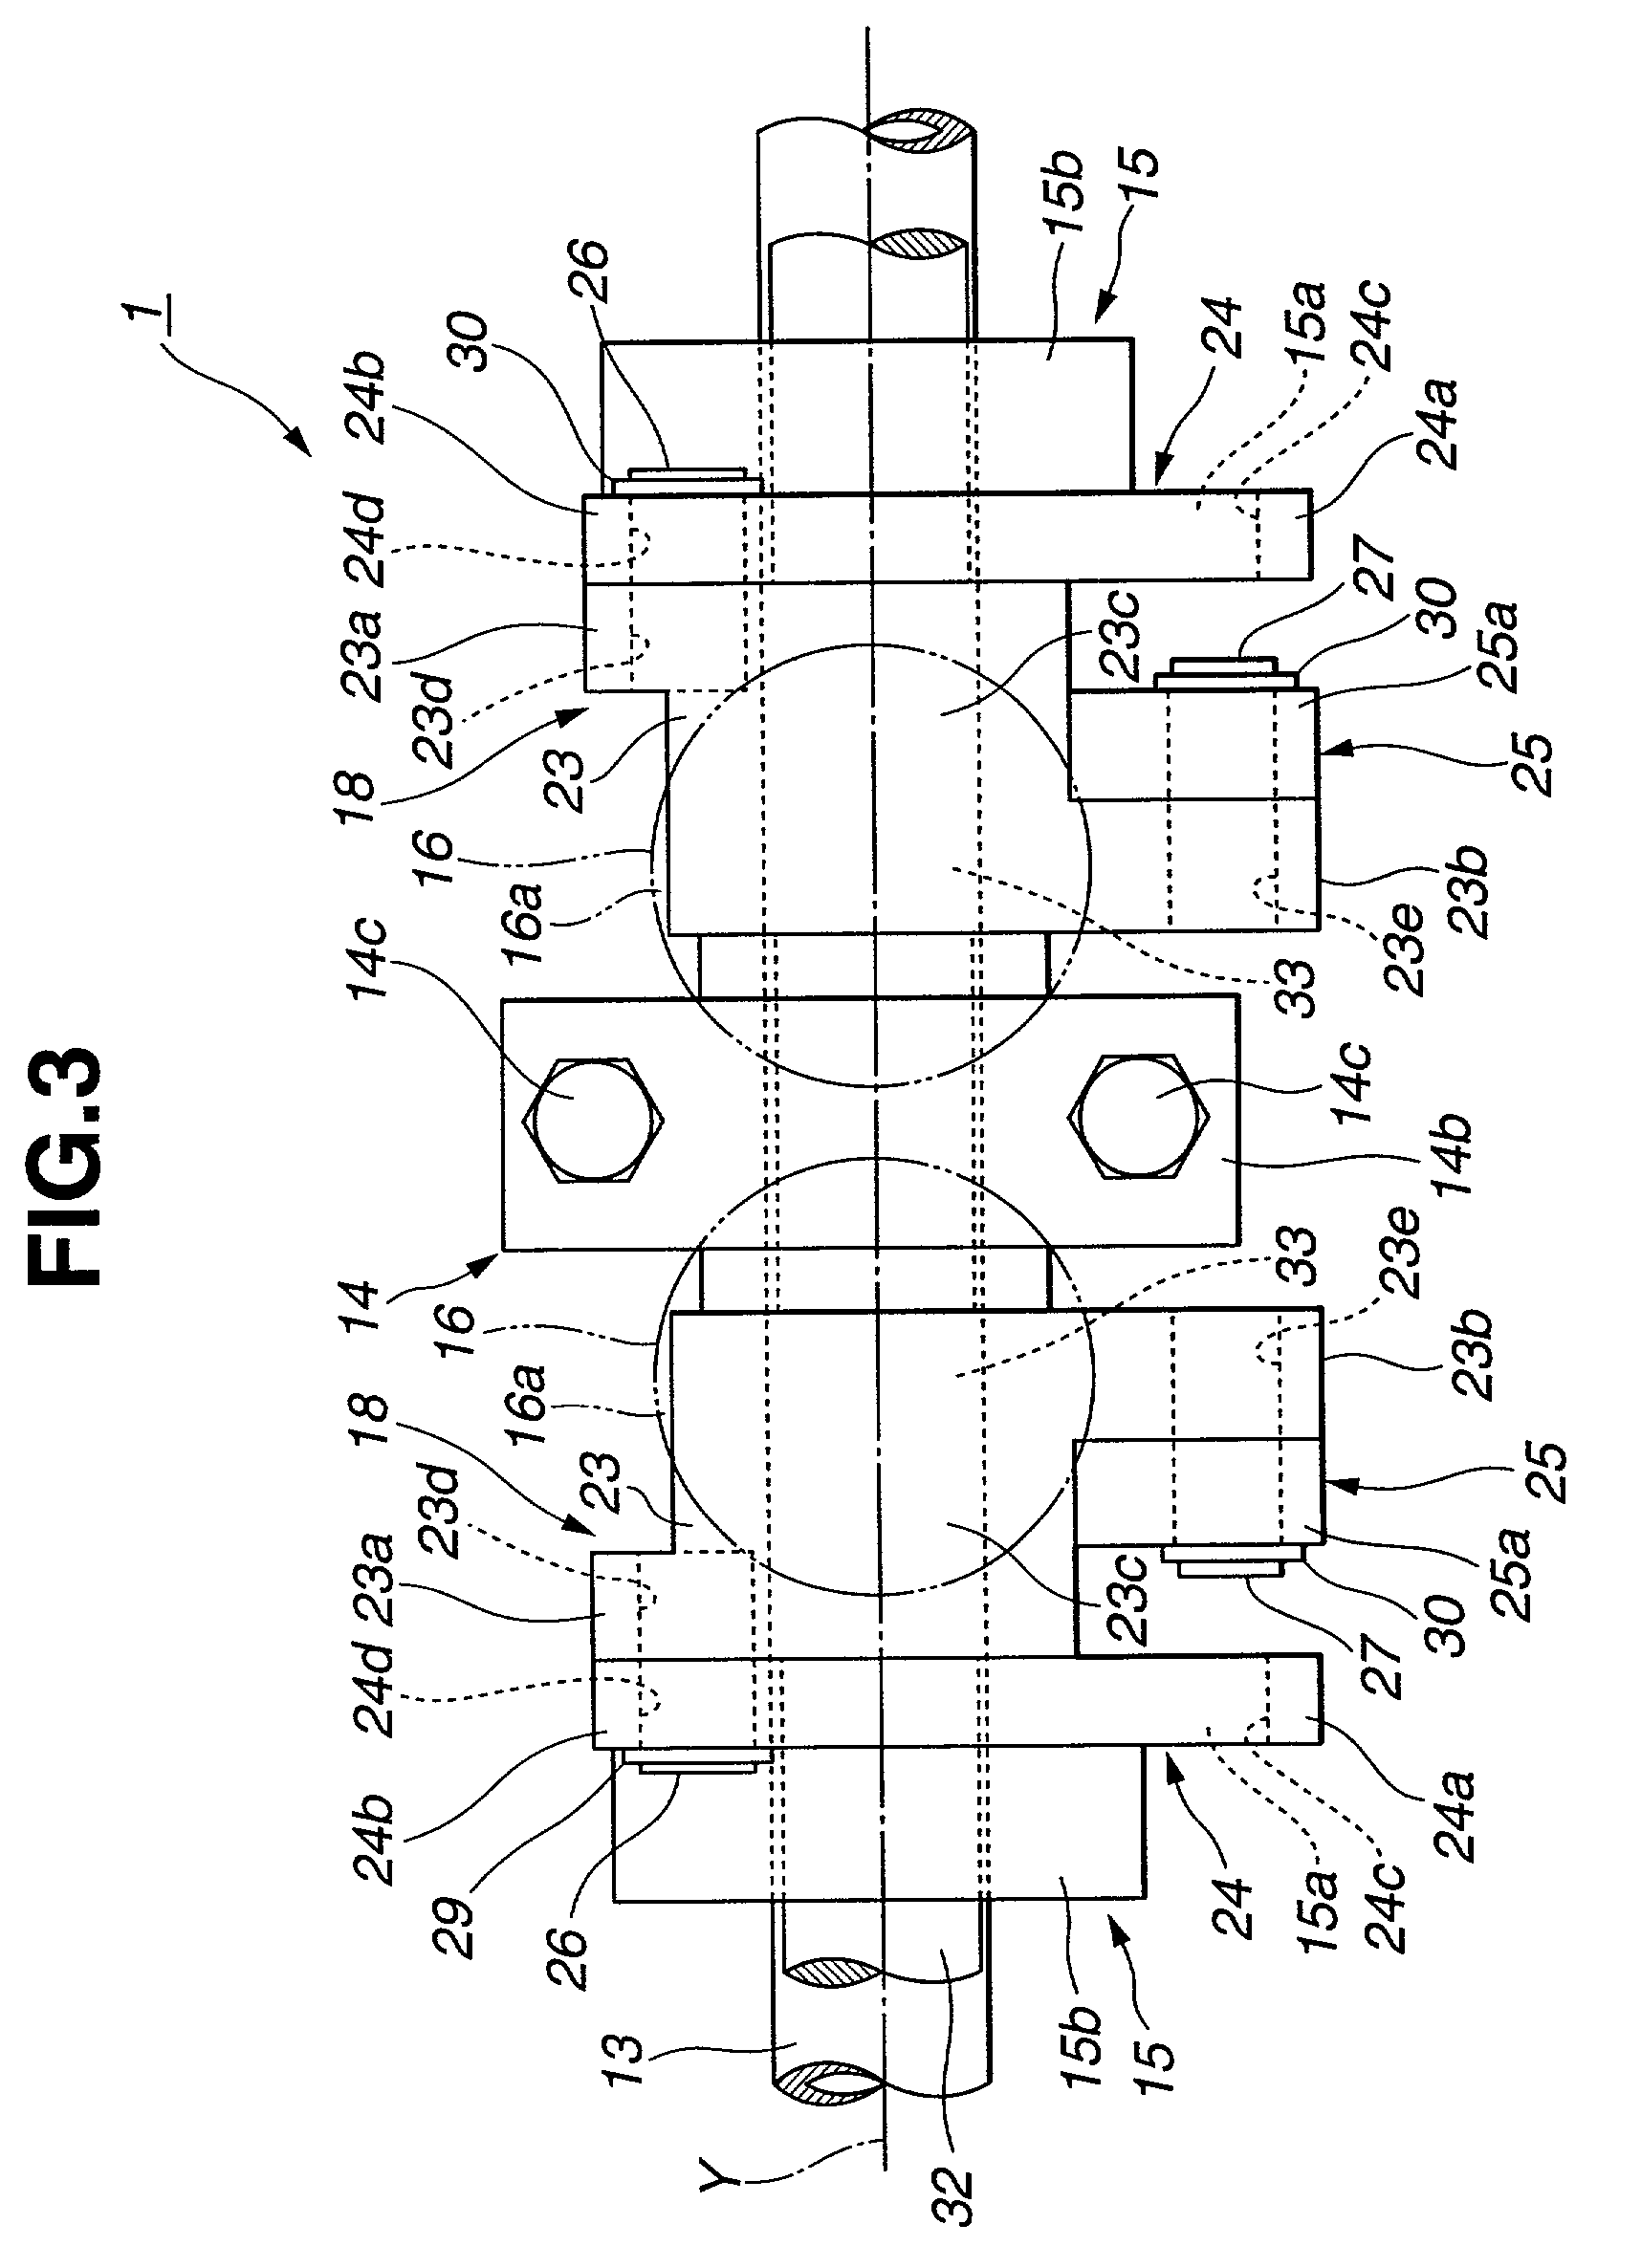 Valve control device of internal combustion engine